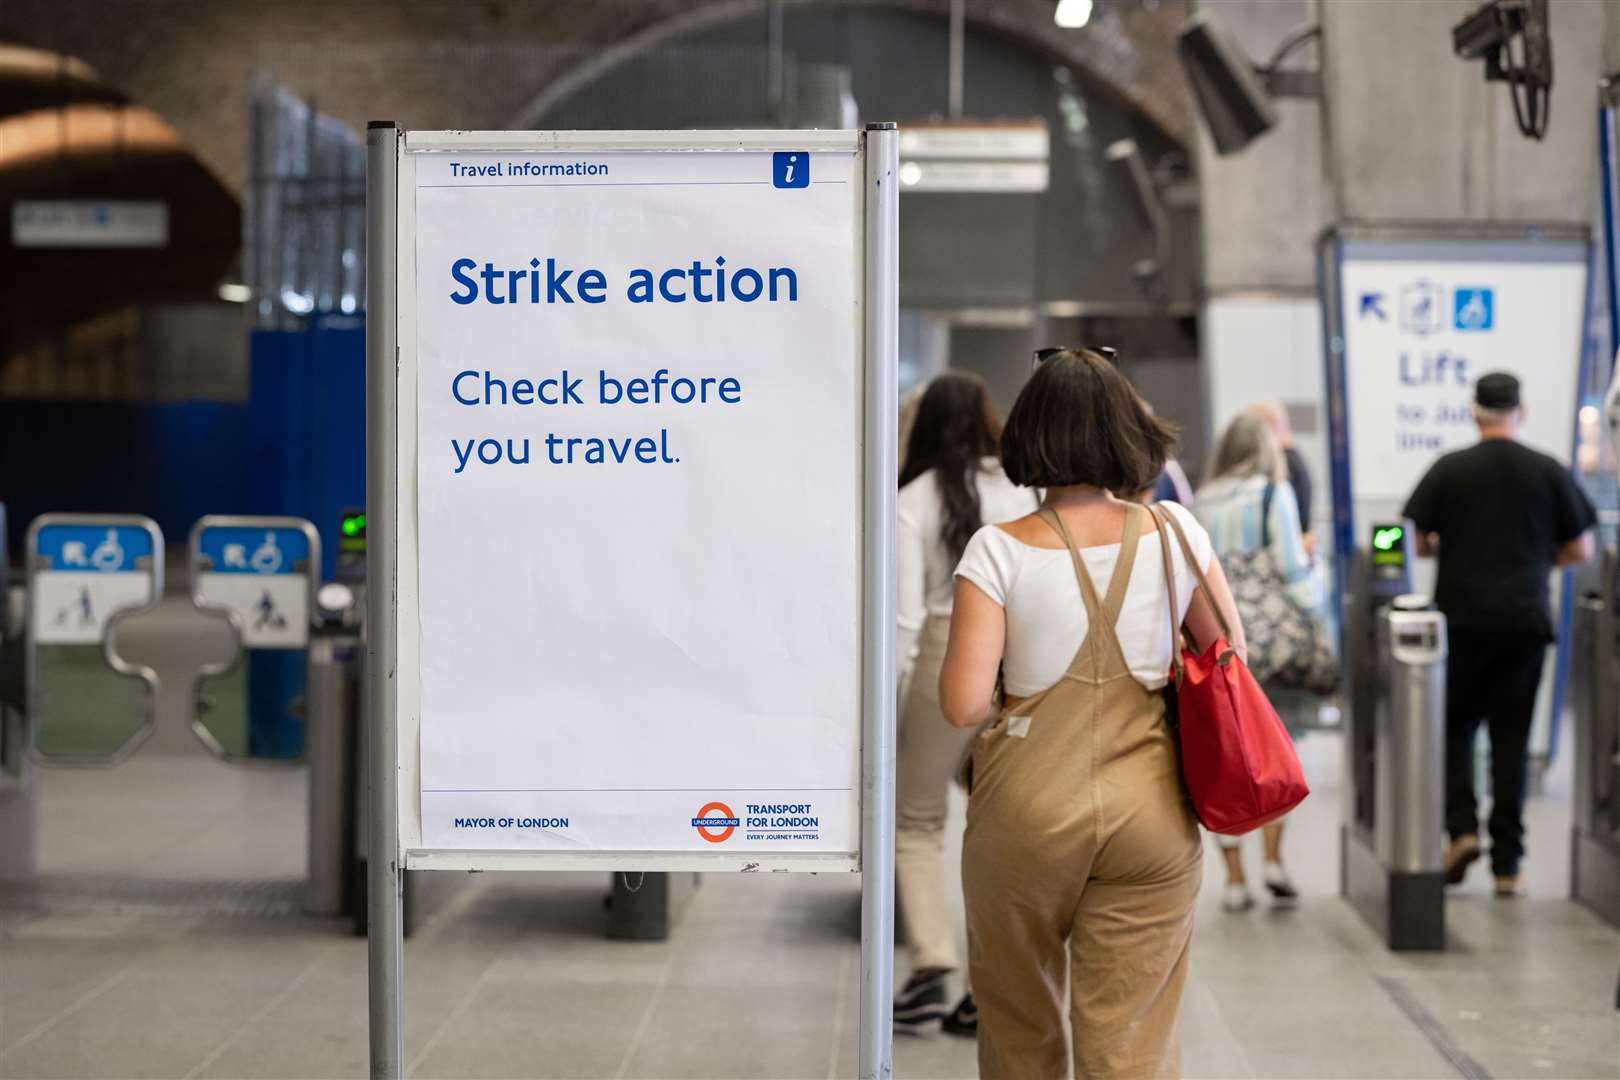 While national rail strikes were called off, action on the London Underground is continuing